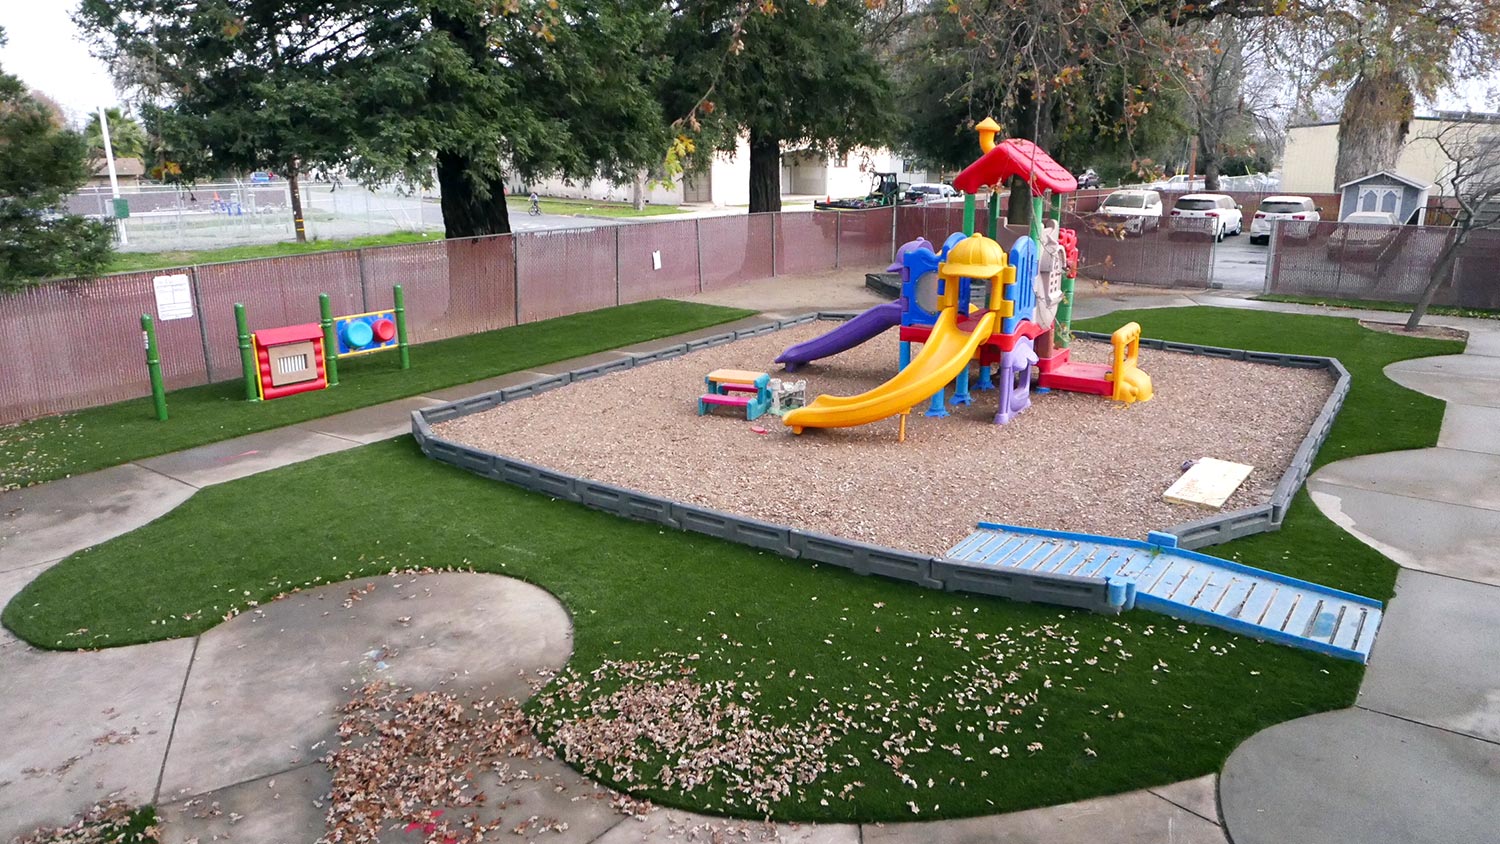 artificial turf play area